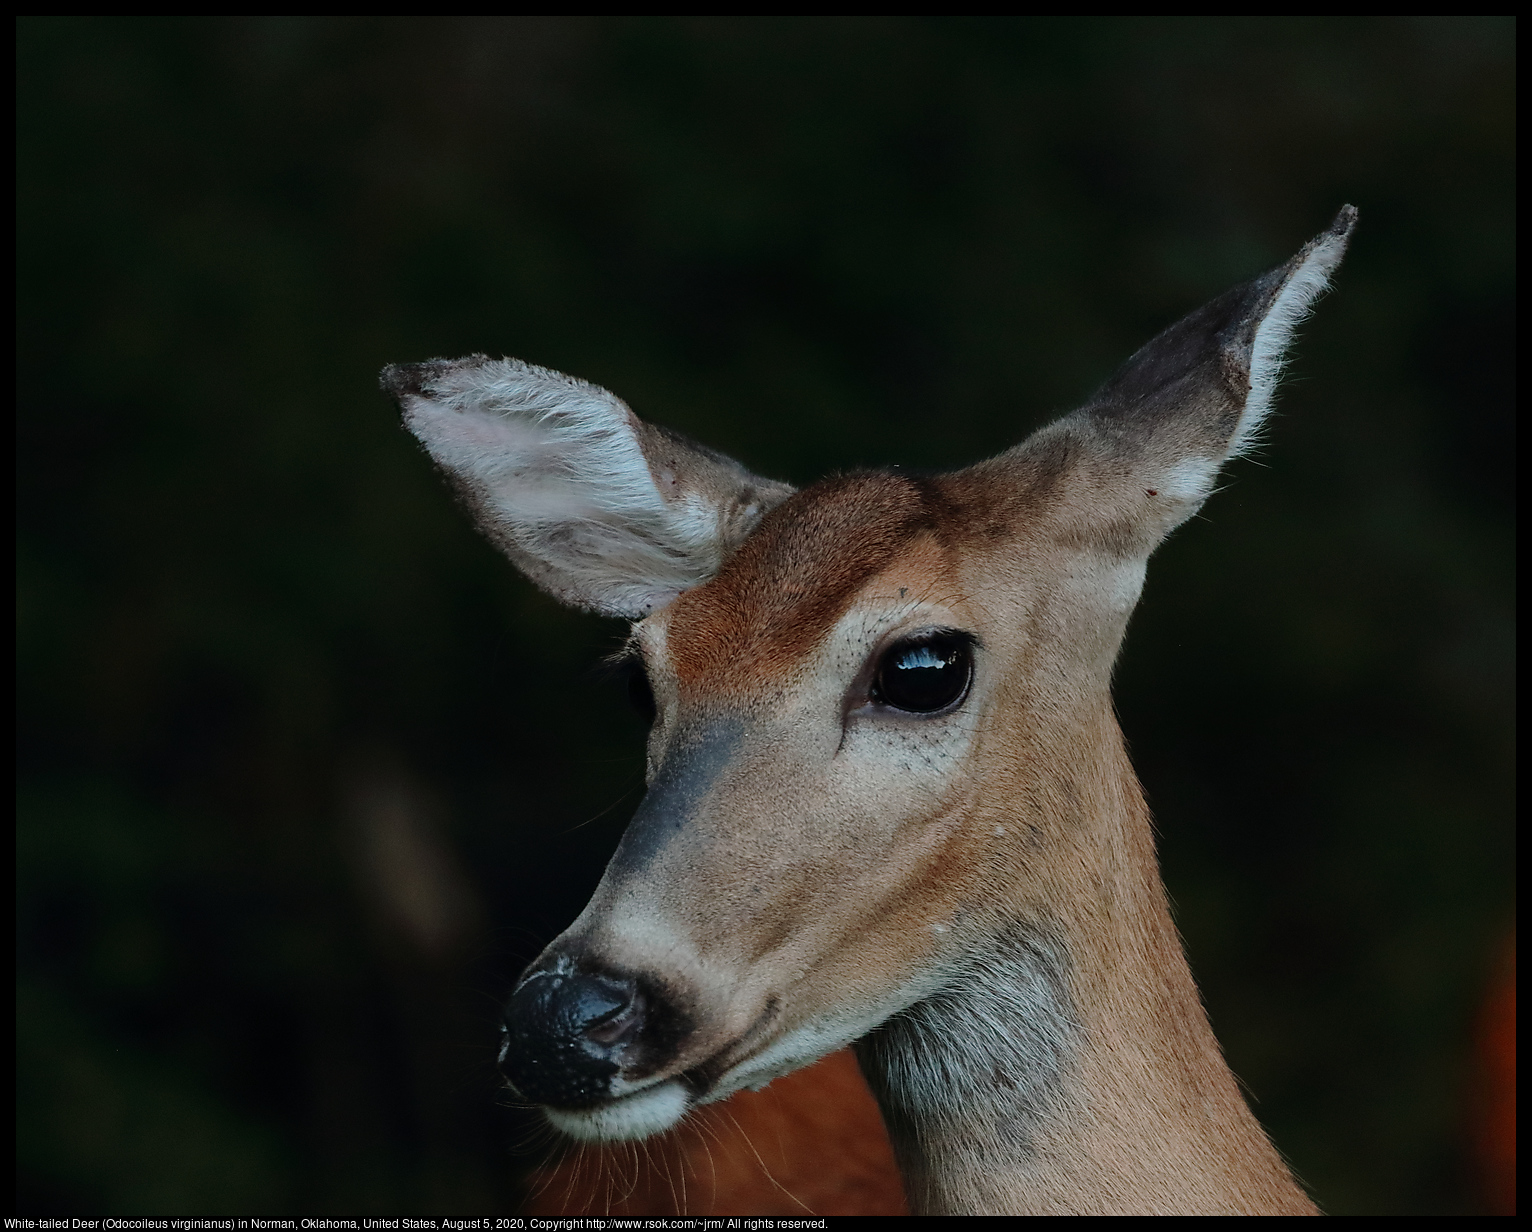 White-tailed Deer (Odocoileus virginianus) in Norman, Oklahoma, United States, August 5, 2020